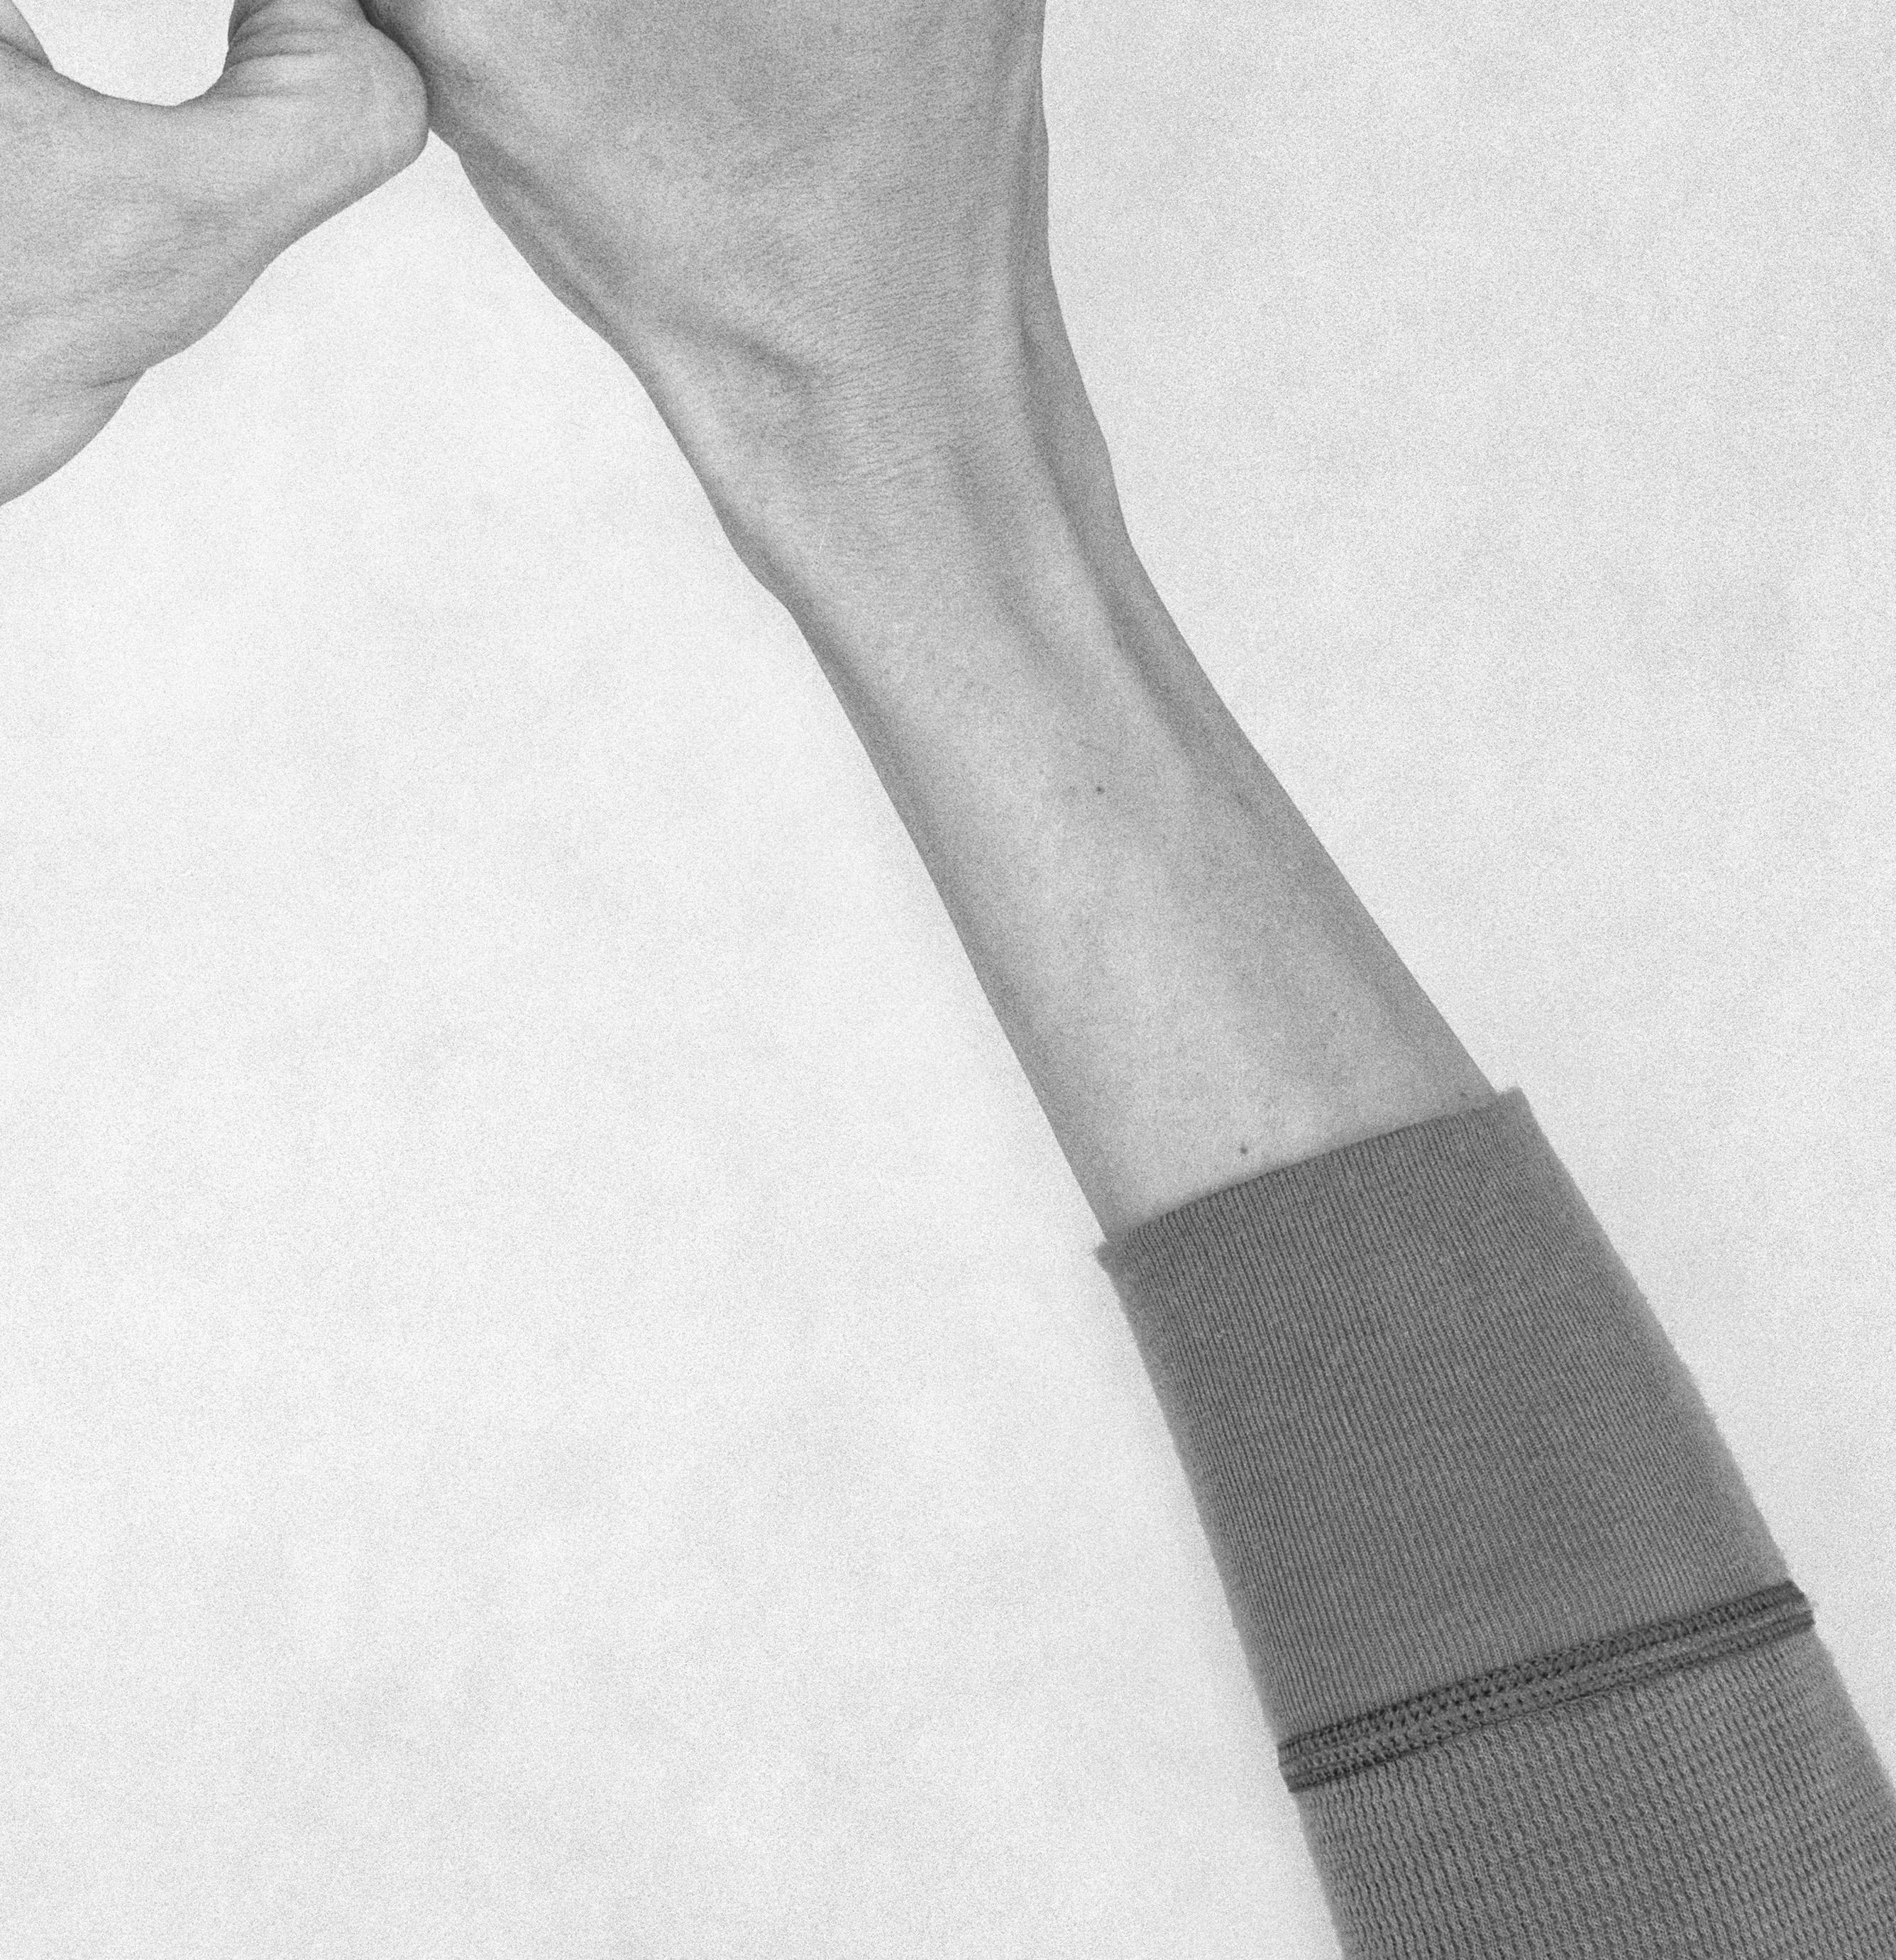 Untitled XXV. From the Series Chiromorphose. Hands. Black & White Photography For Sale 2